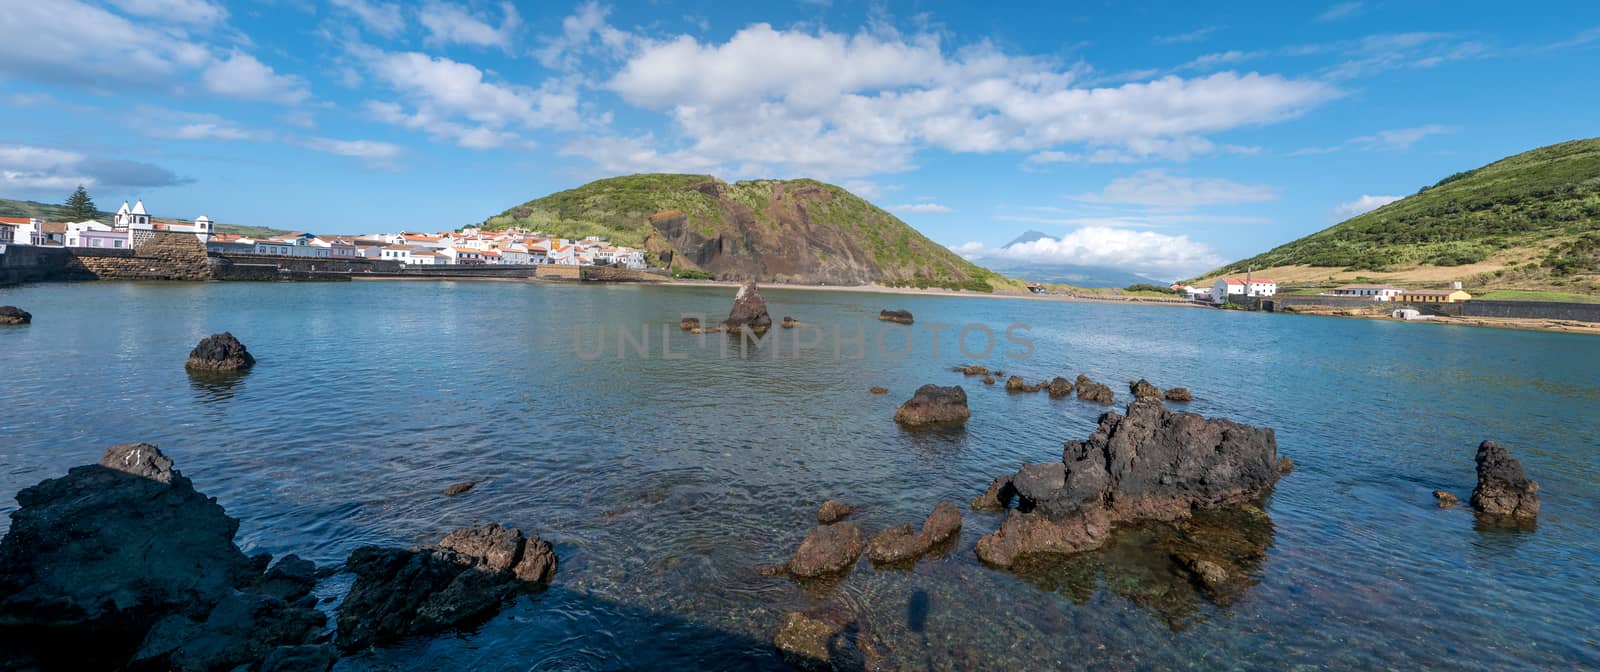 Walk on the Azores archipelago. Discovery of the island of Faial, Azores. Portugal by shovag